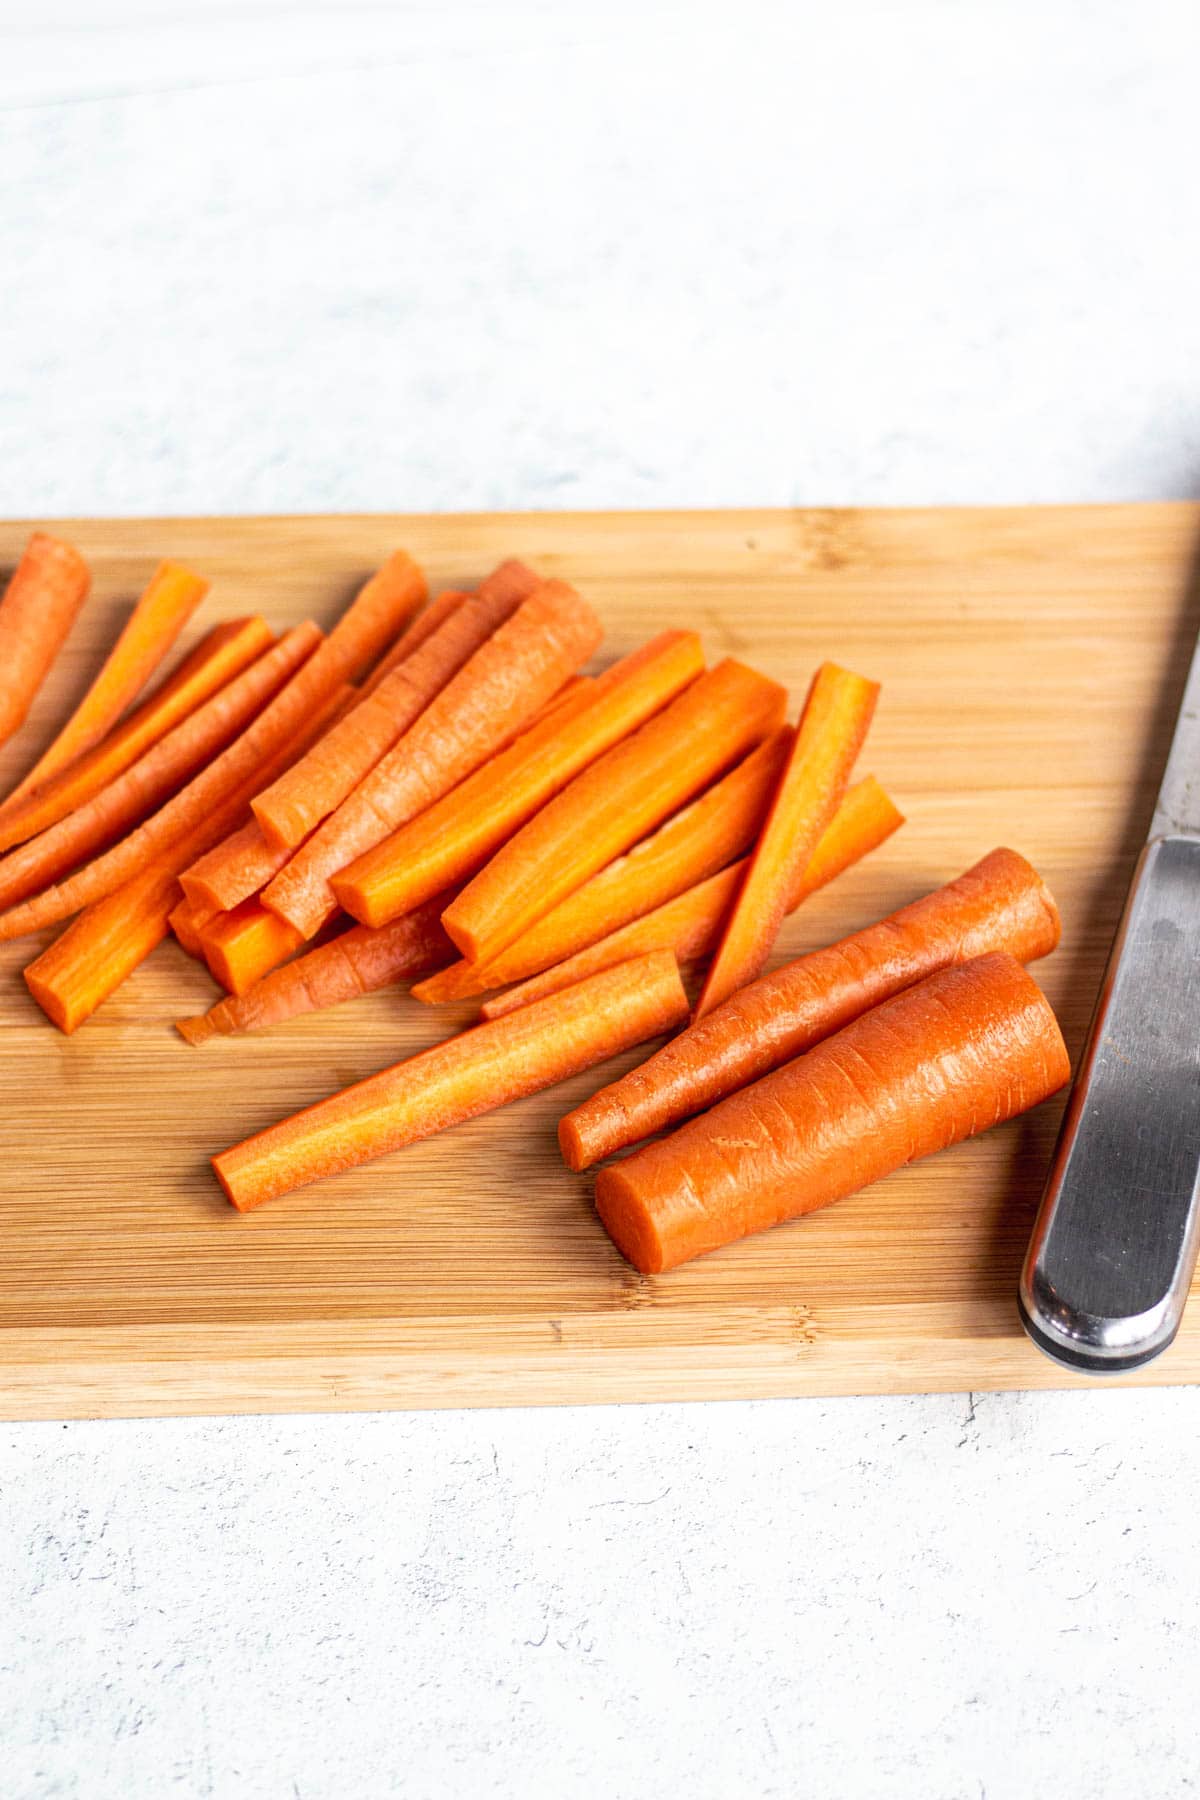 Carrots on a wooden cutting board, some whole and some sliced into ½ inch thickness. 